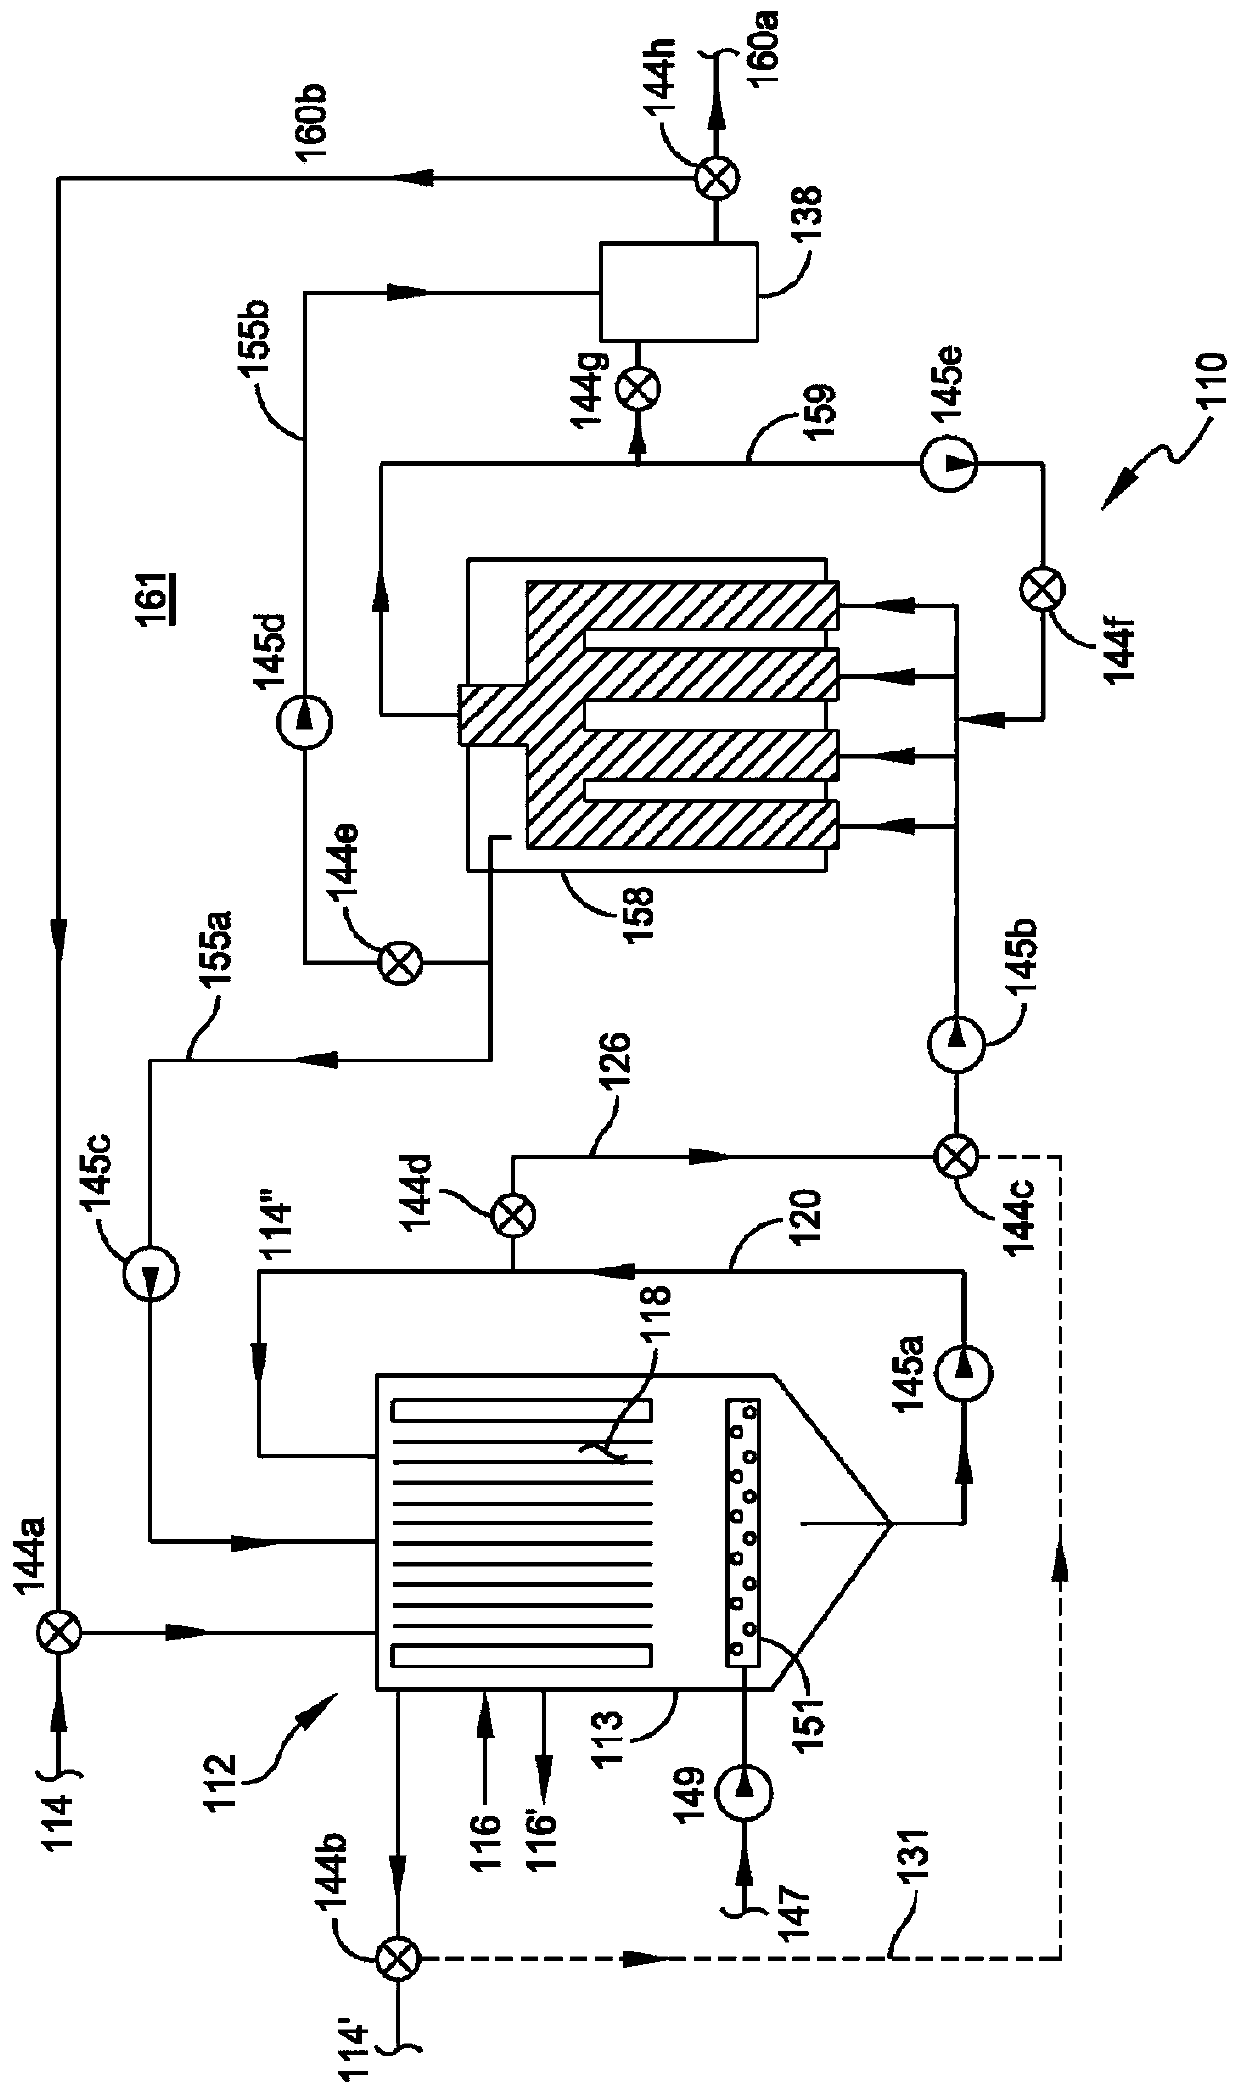 Osmotic separation systems and methods